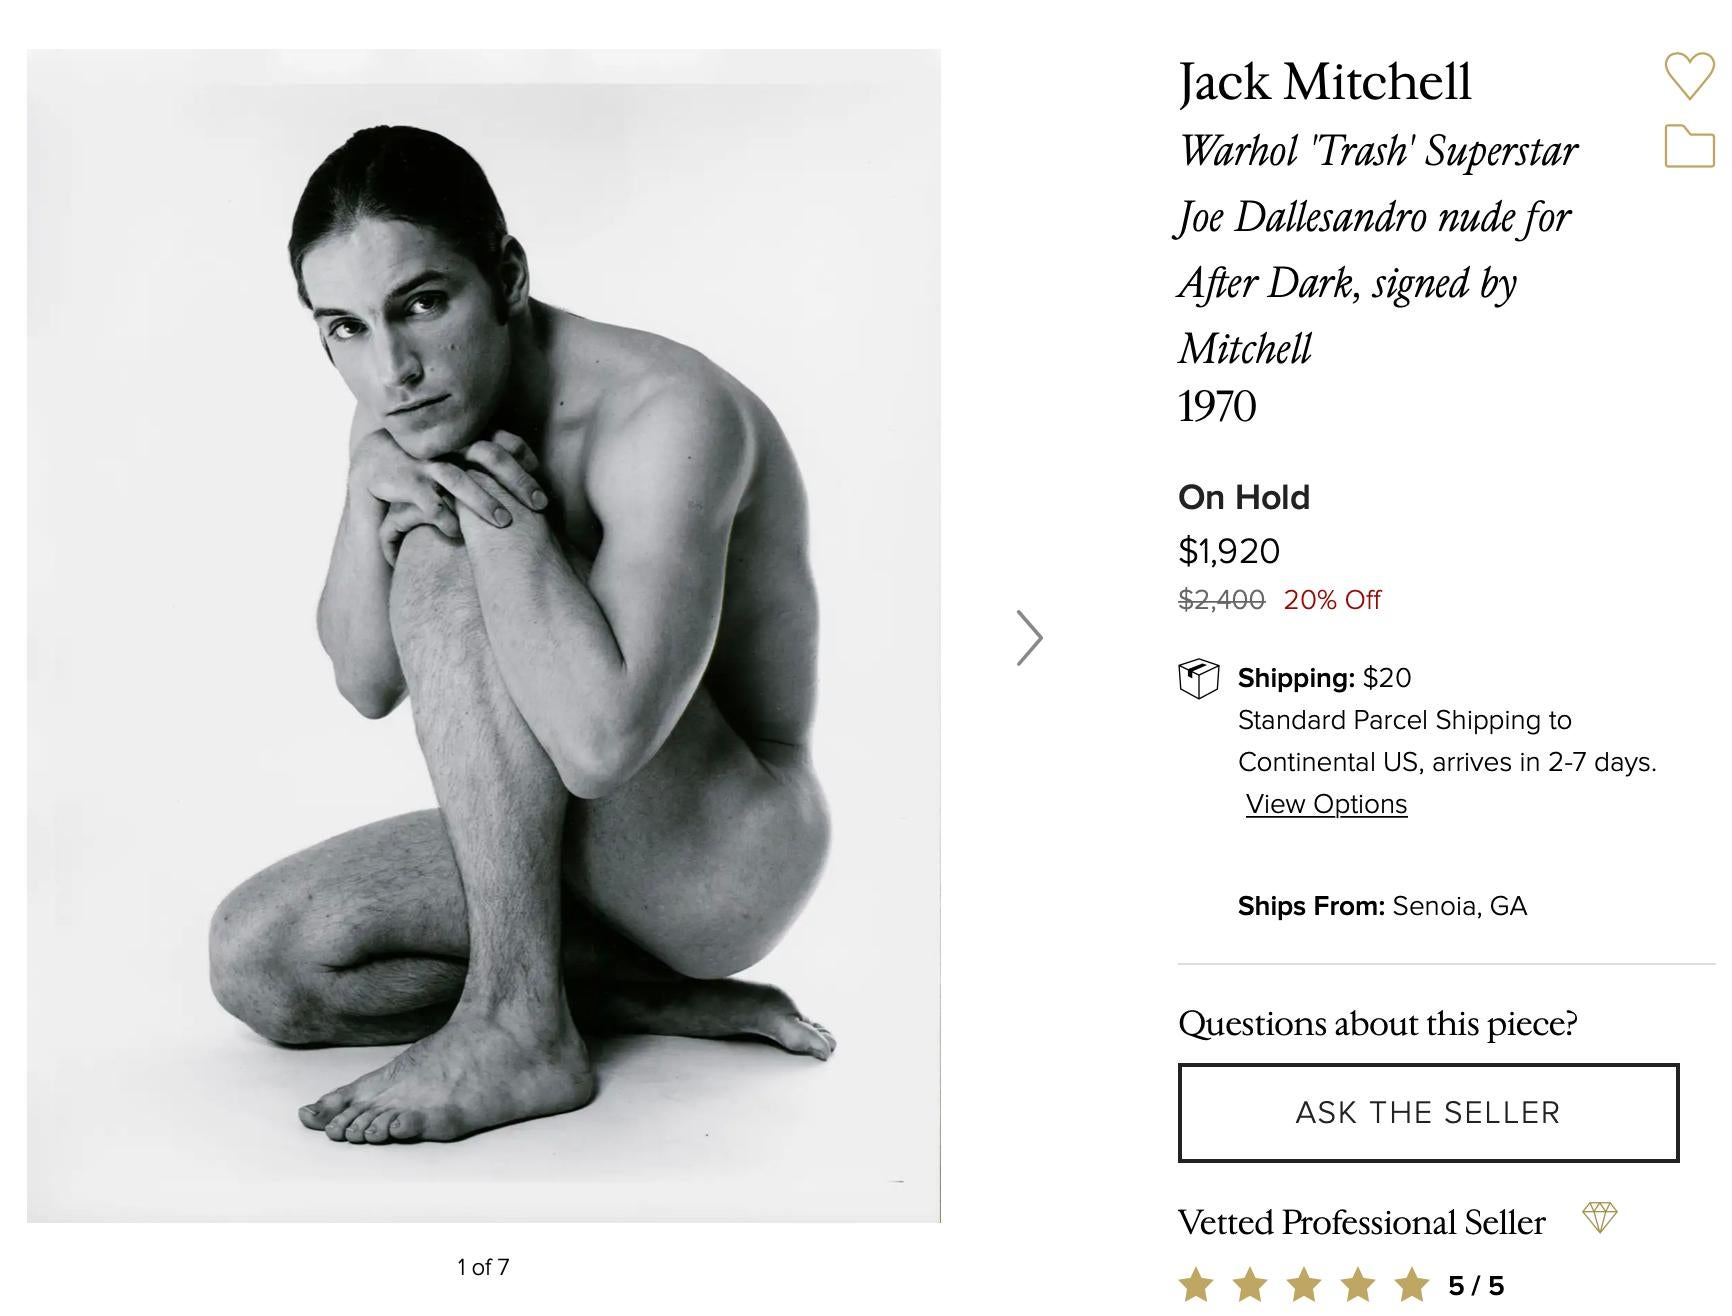 Four Warhol-Related Vintage Jack Mitchell Photographs On Hold For Customer 3